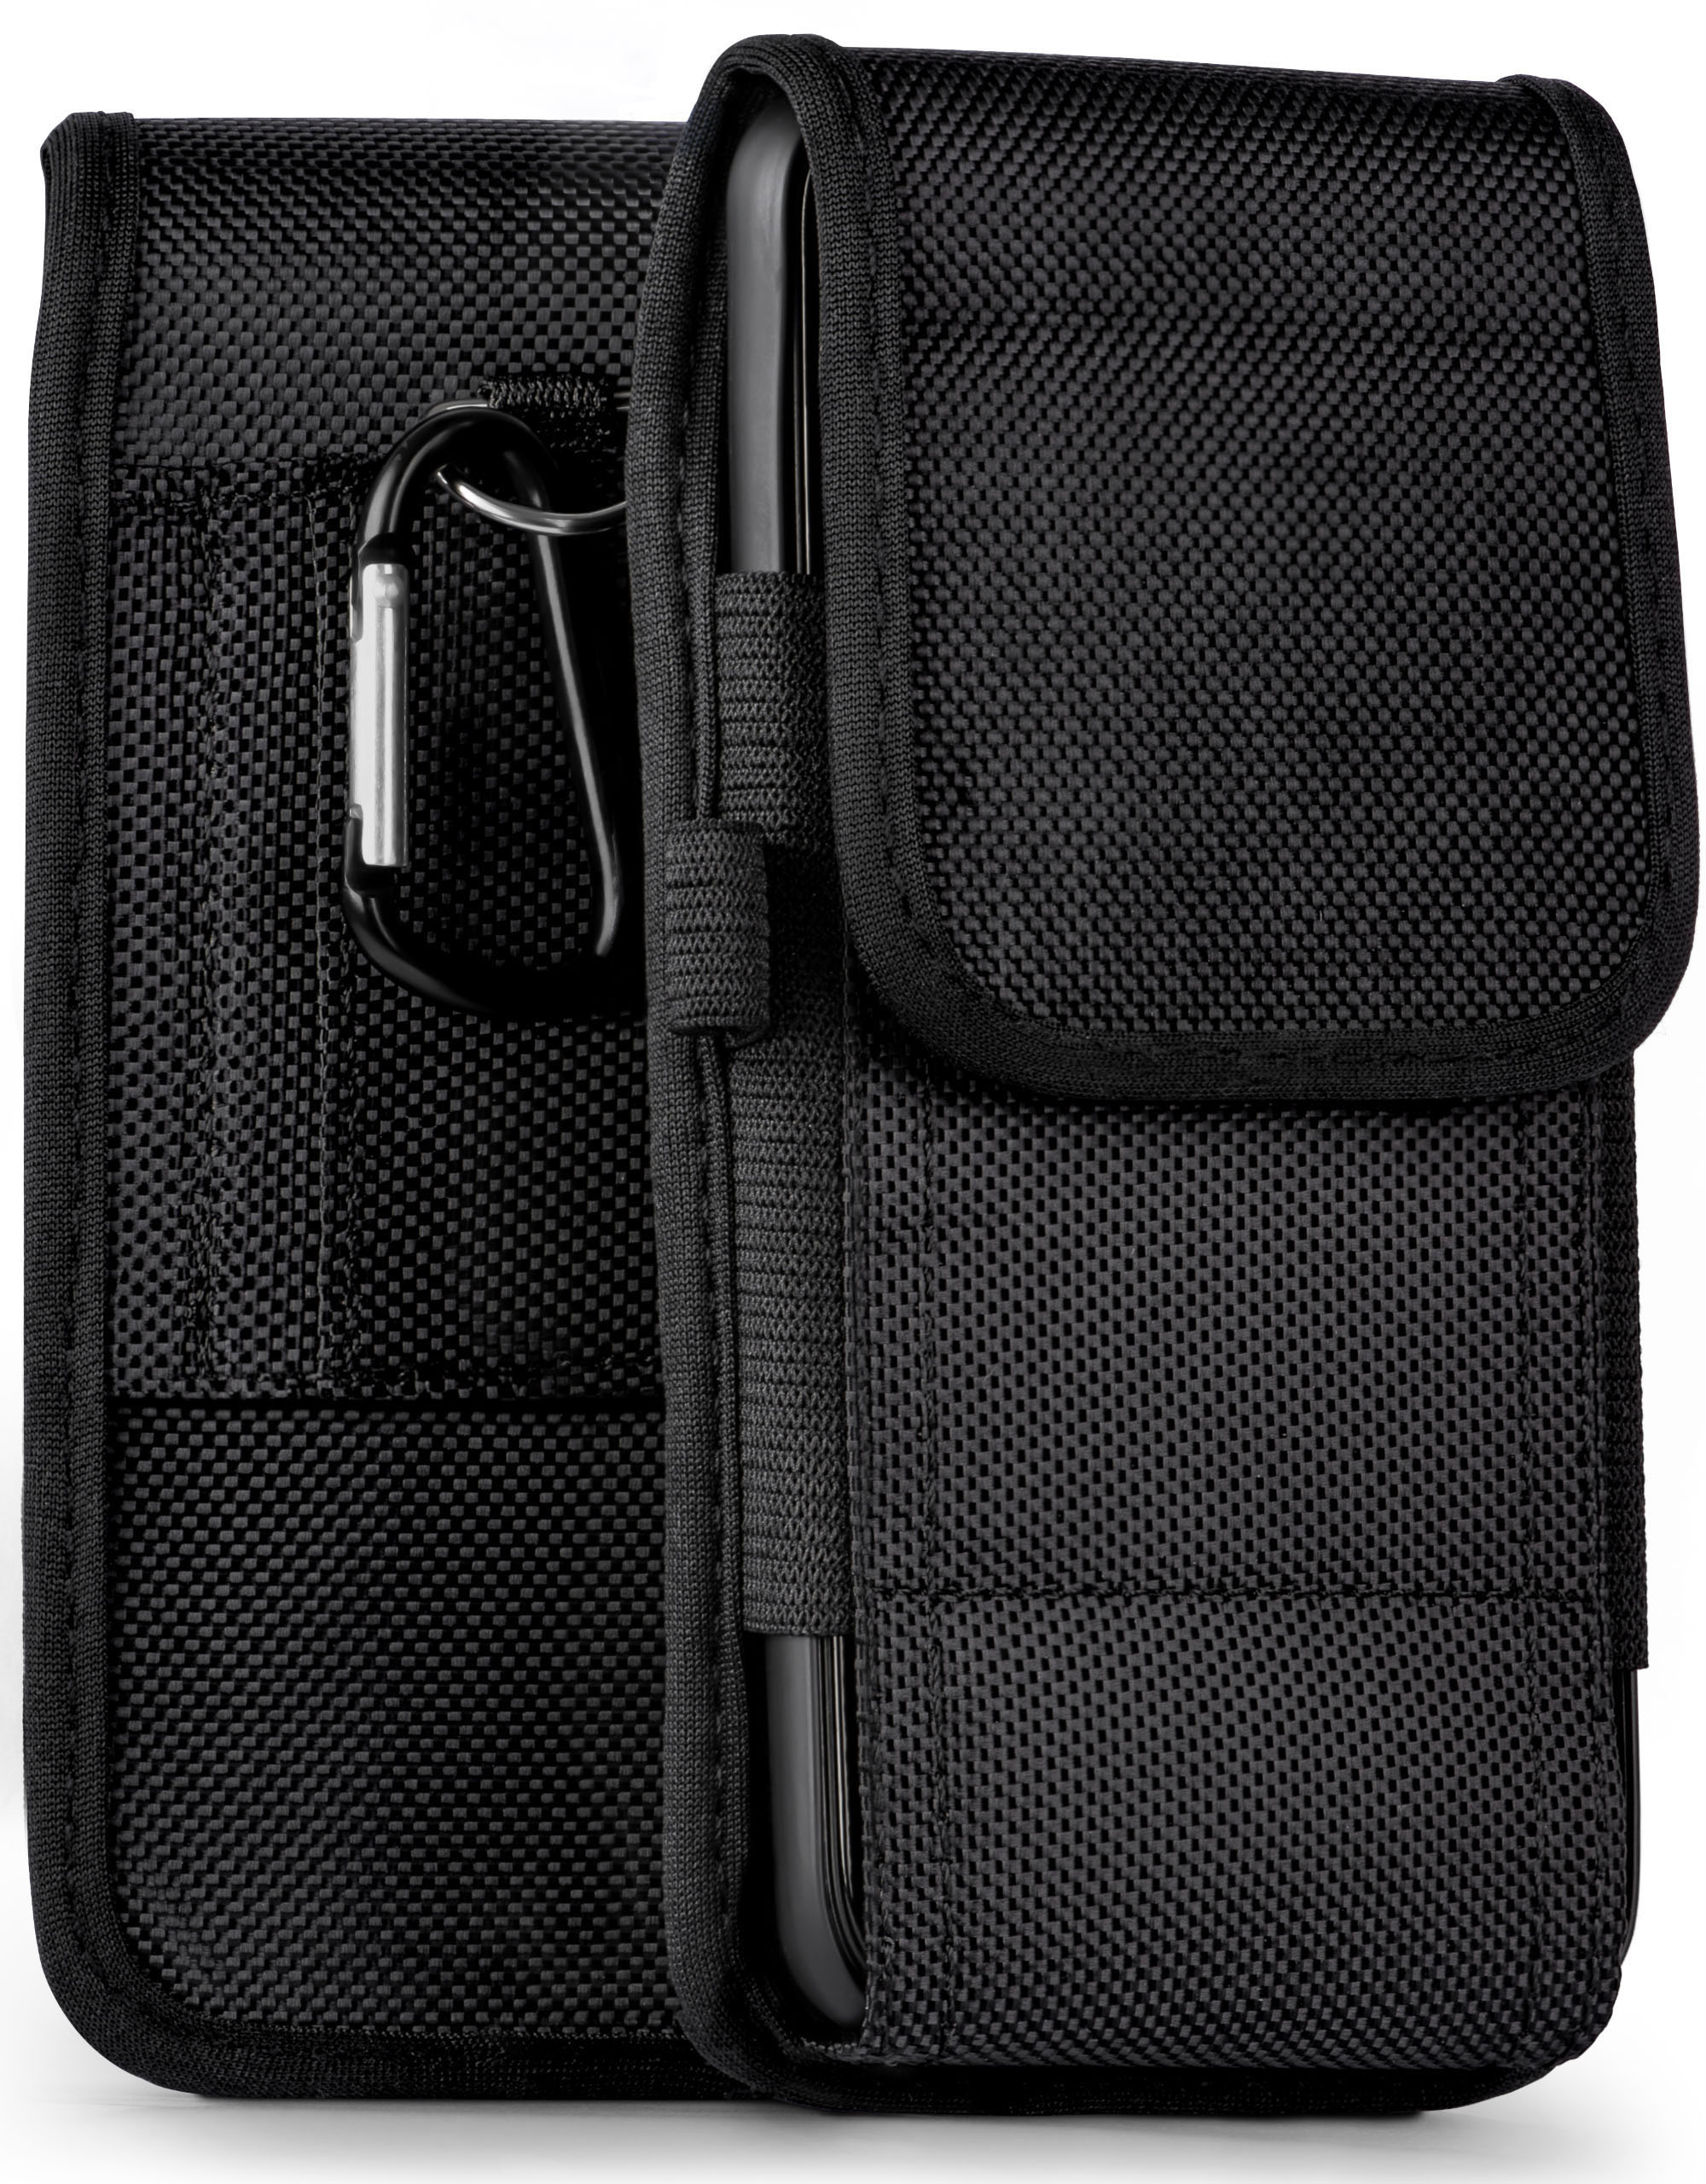 CAT, Agility Case, Holster, S40, MOEX Trail